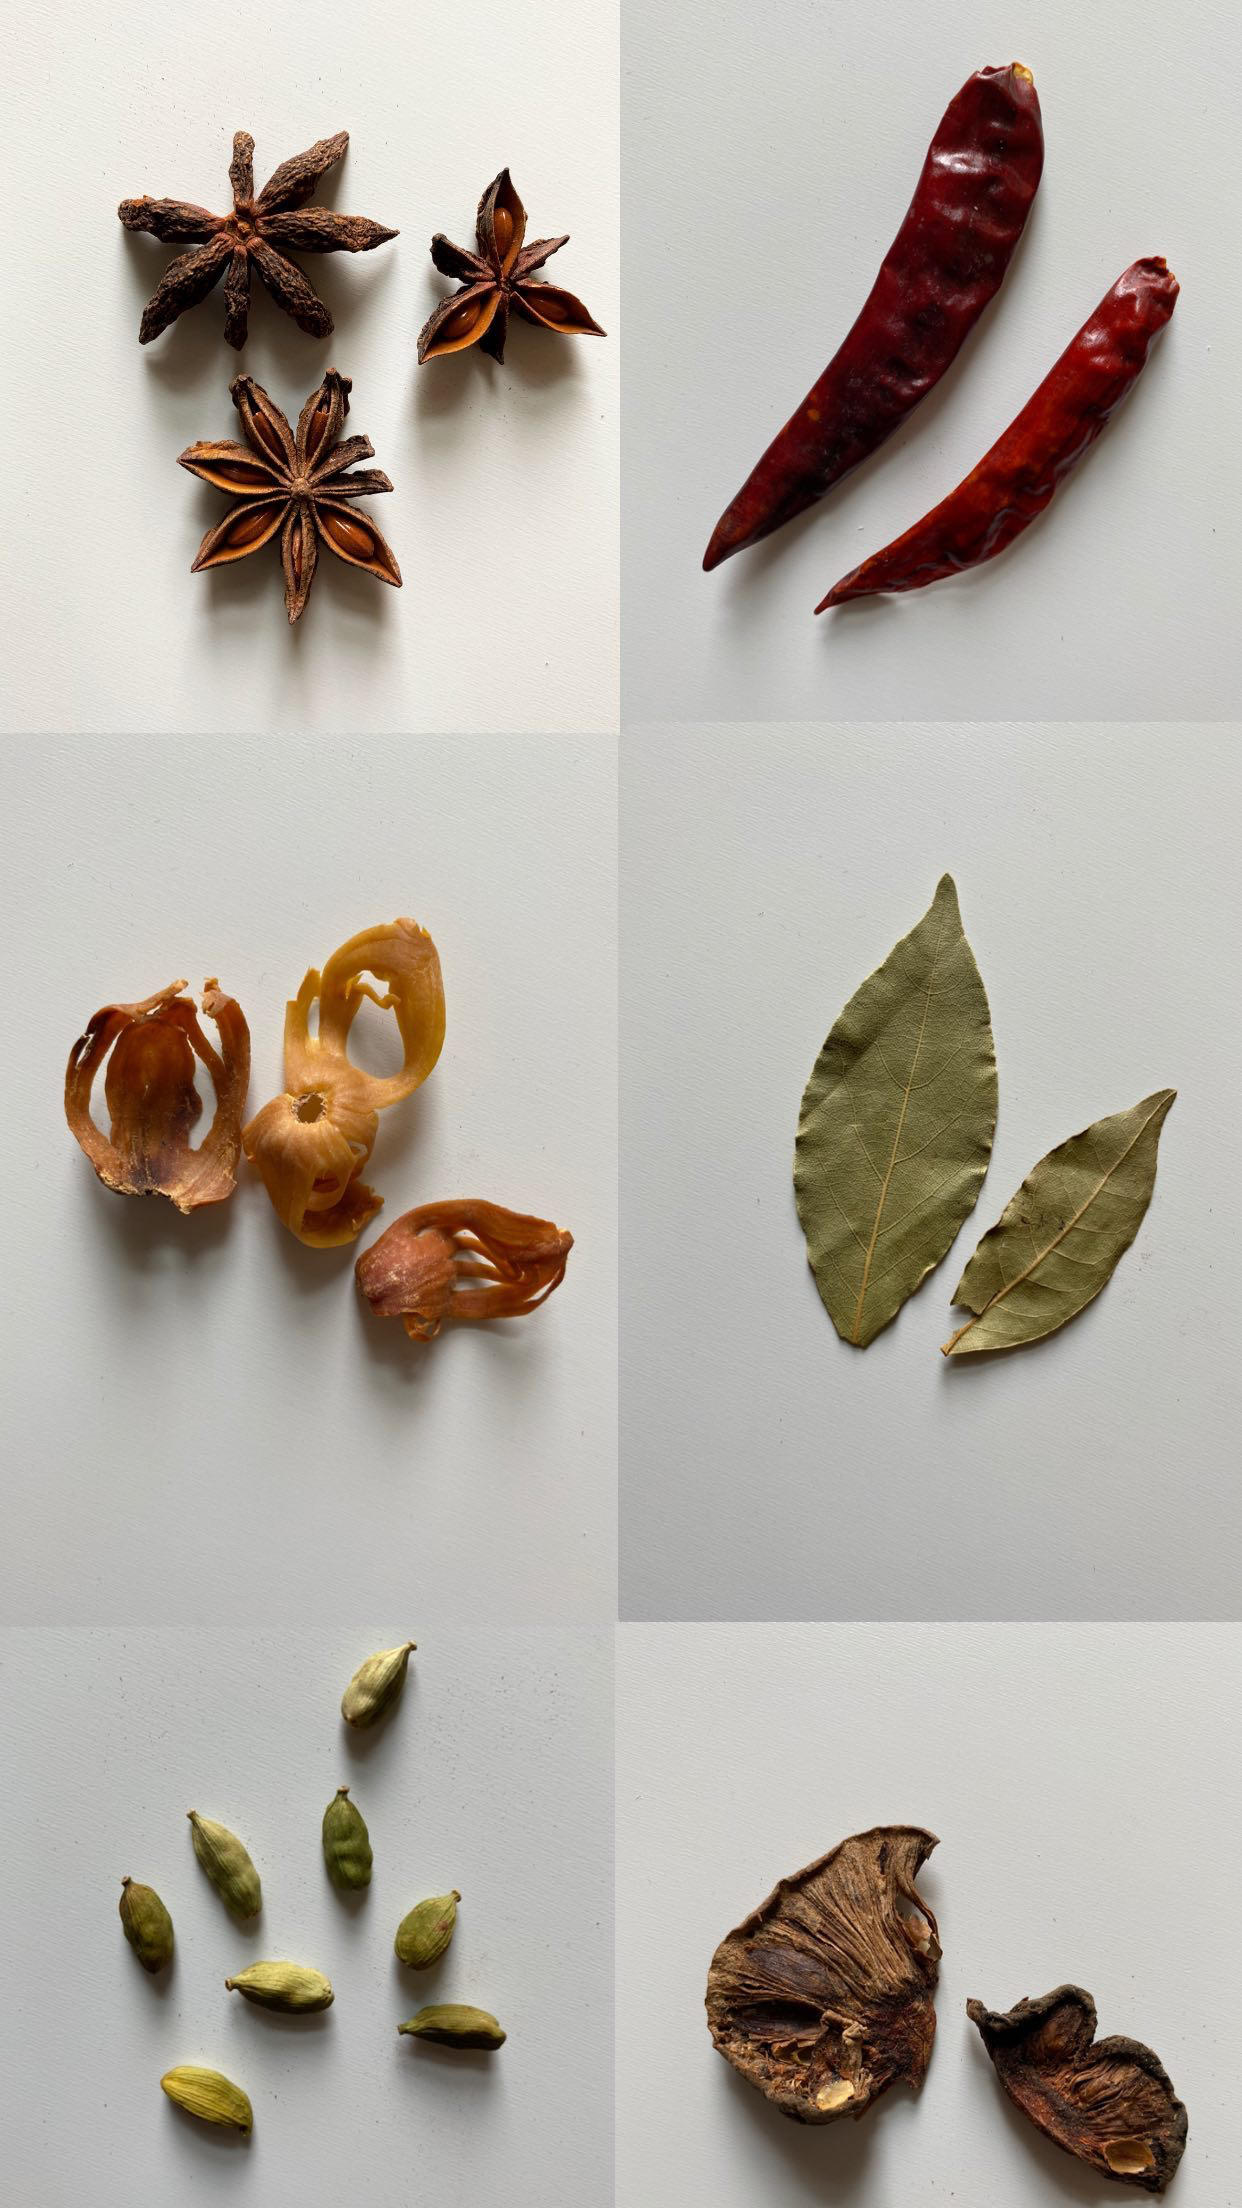 Images of spices against a white background 